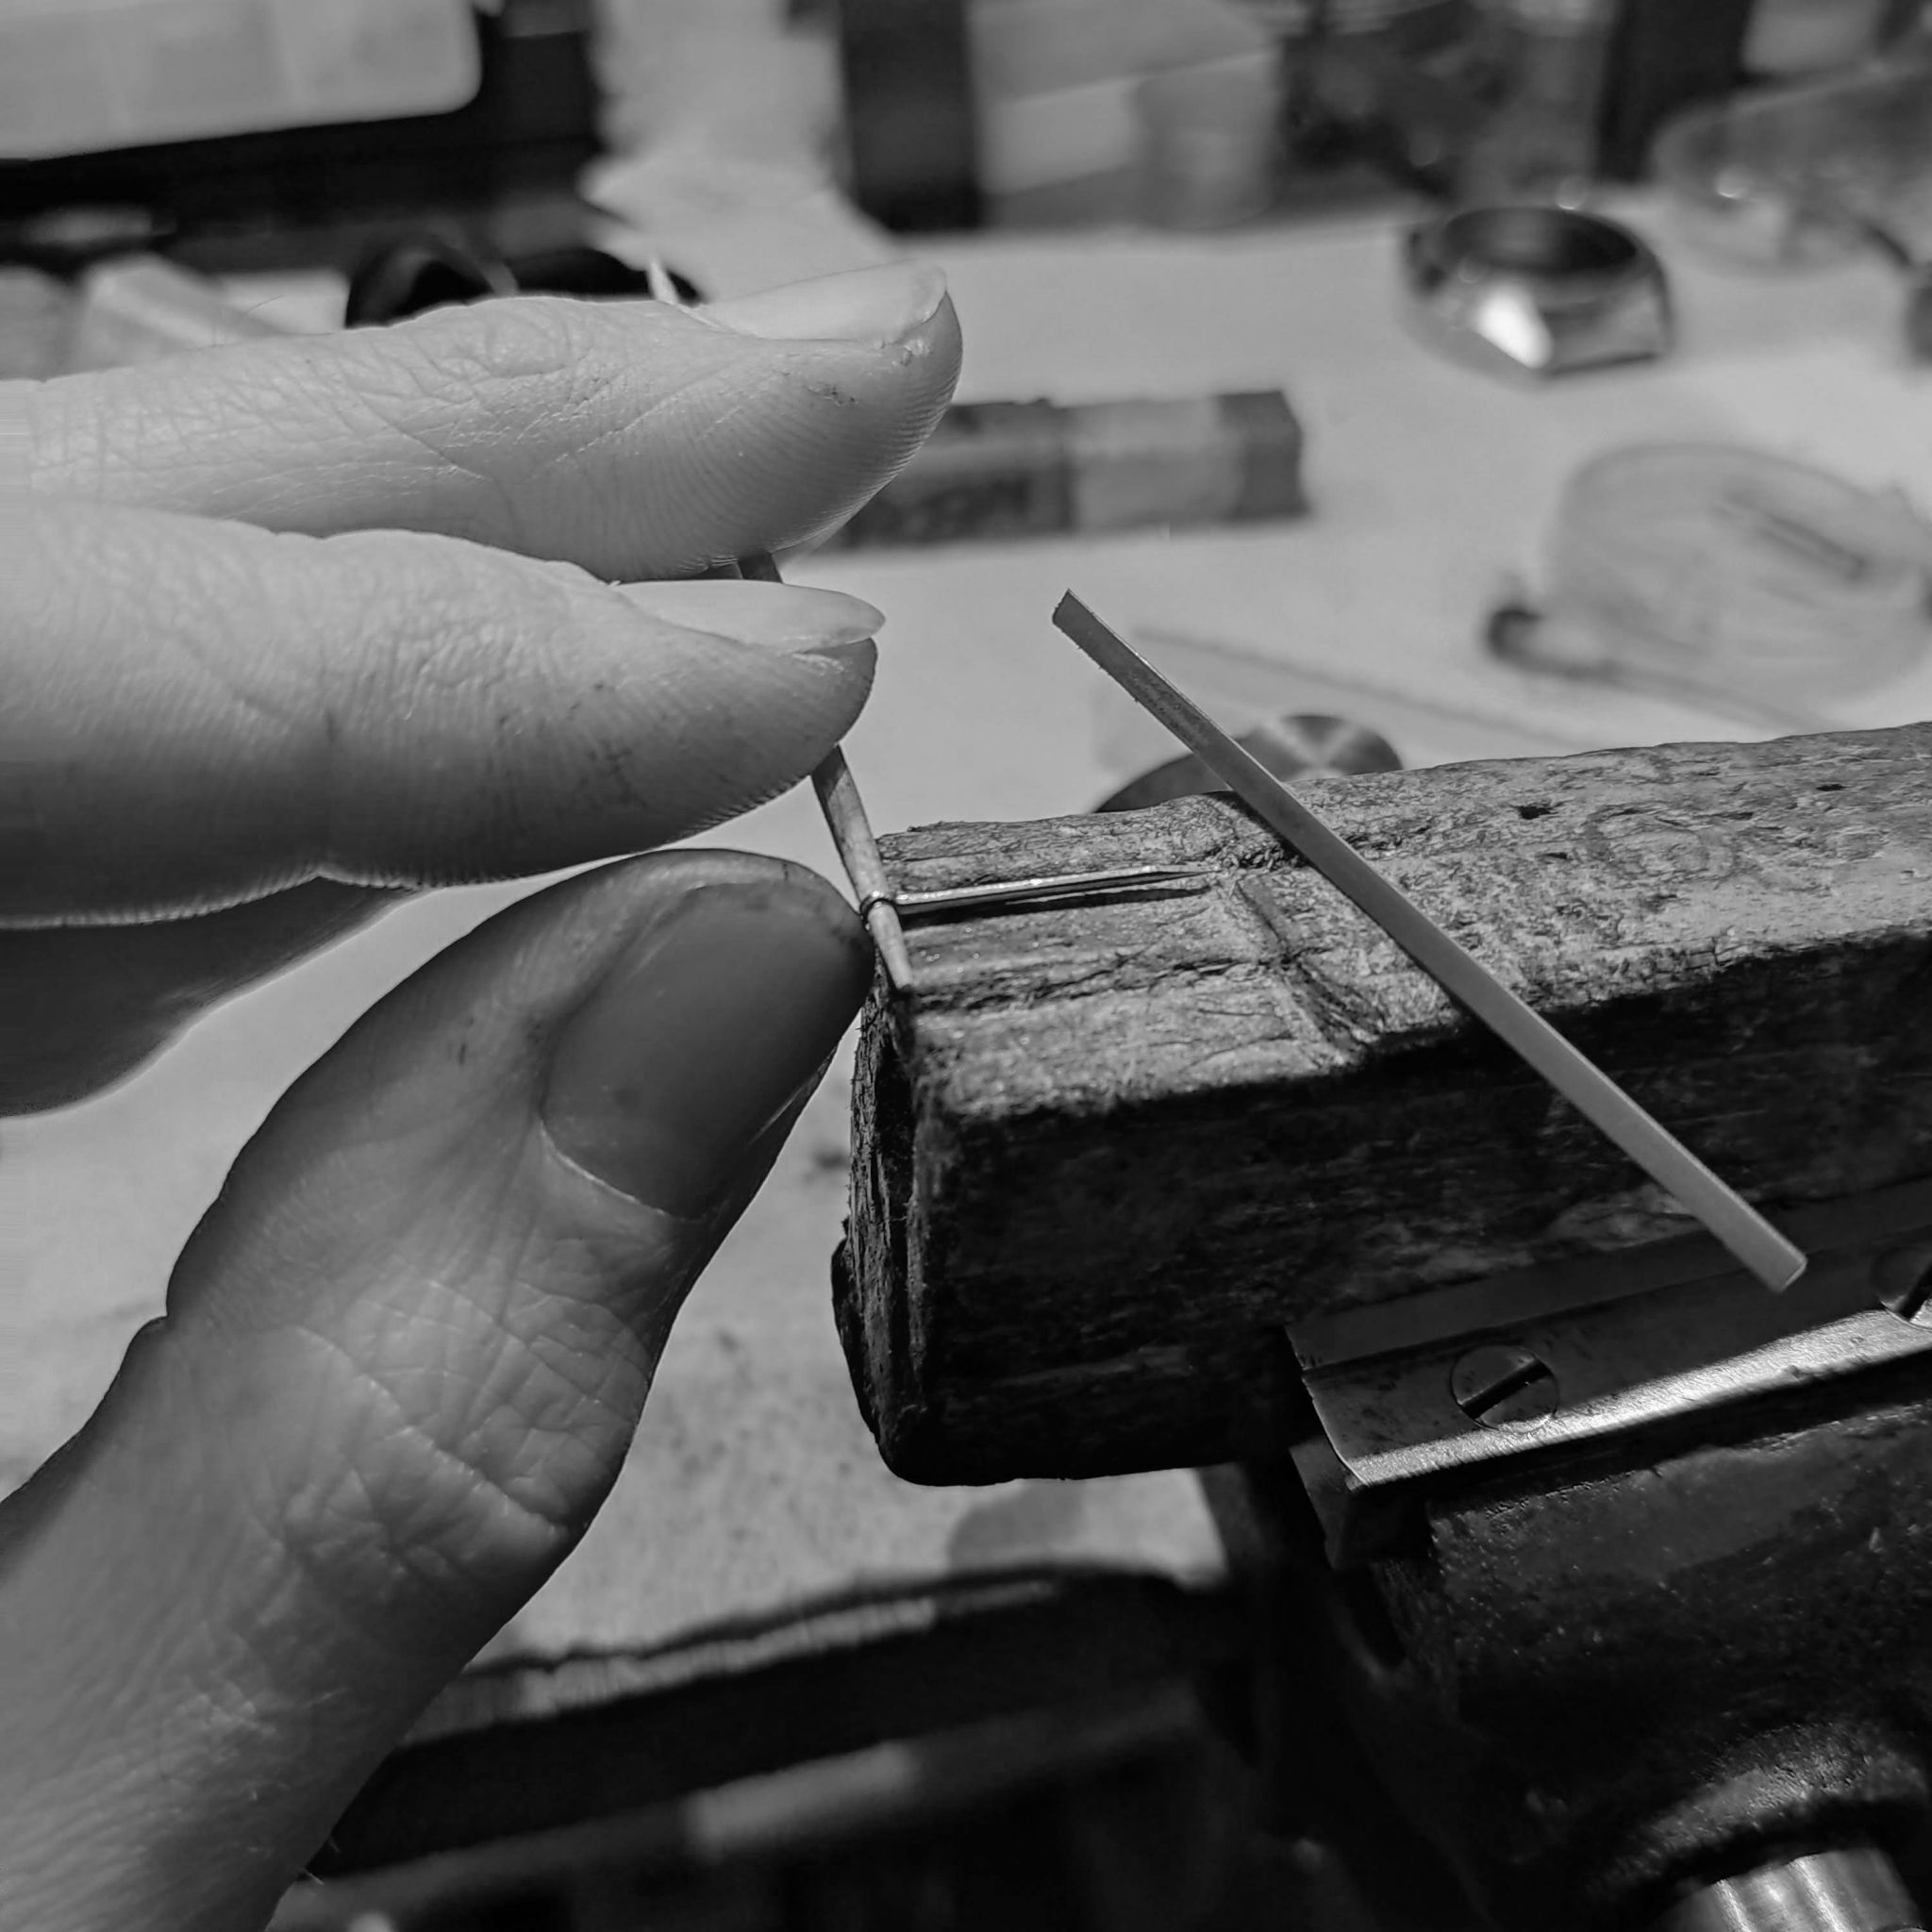 Here I touch up the side of the hand to correct the angle at the hub area with a ruby filing stone.